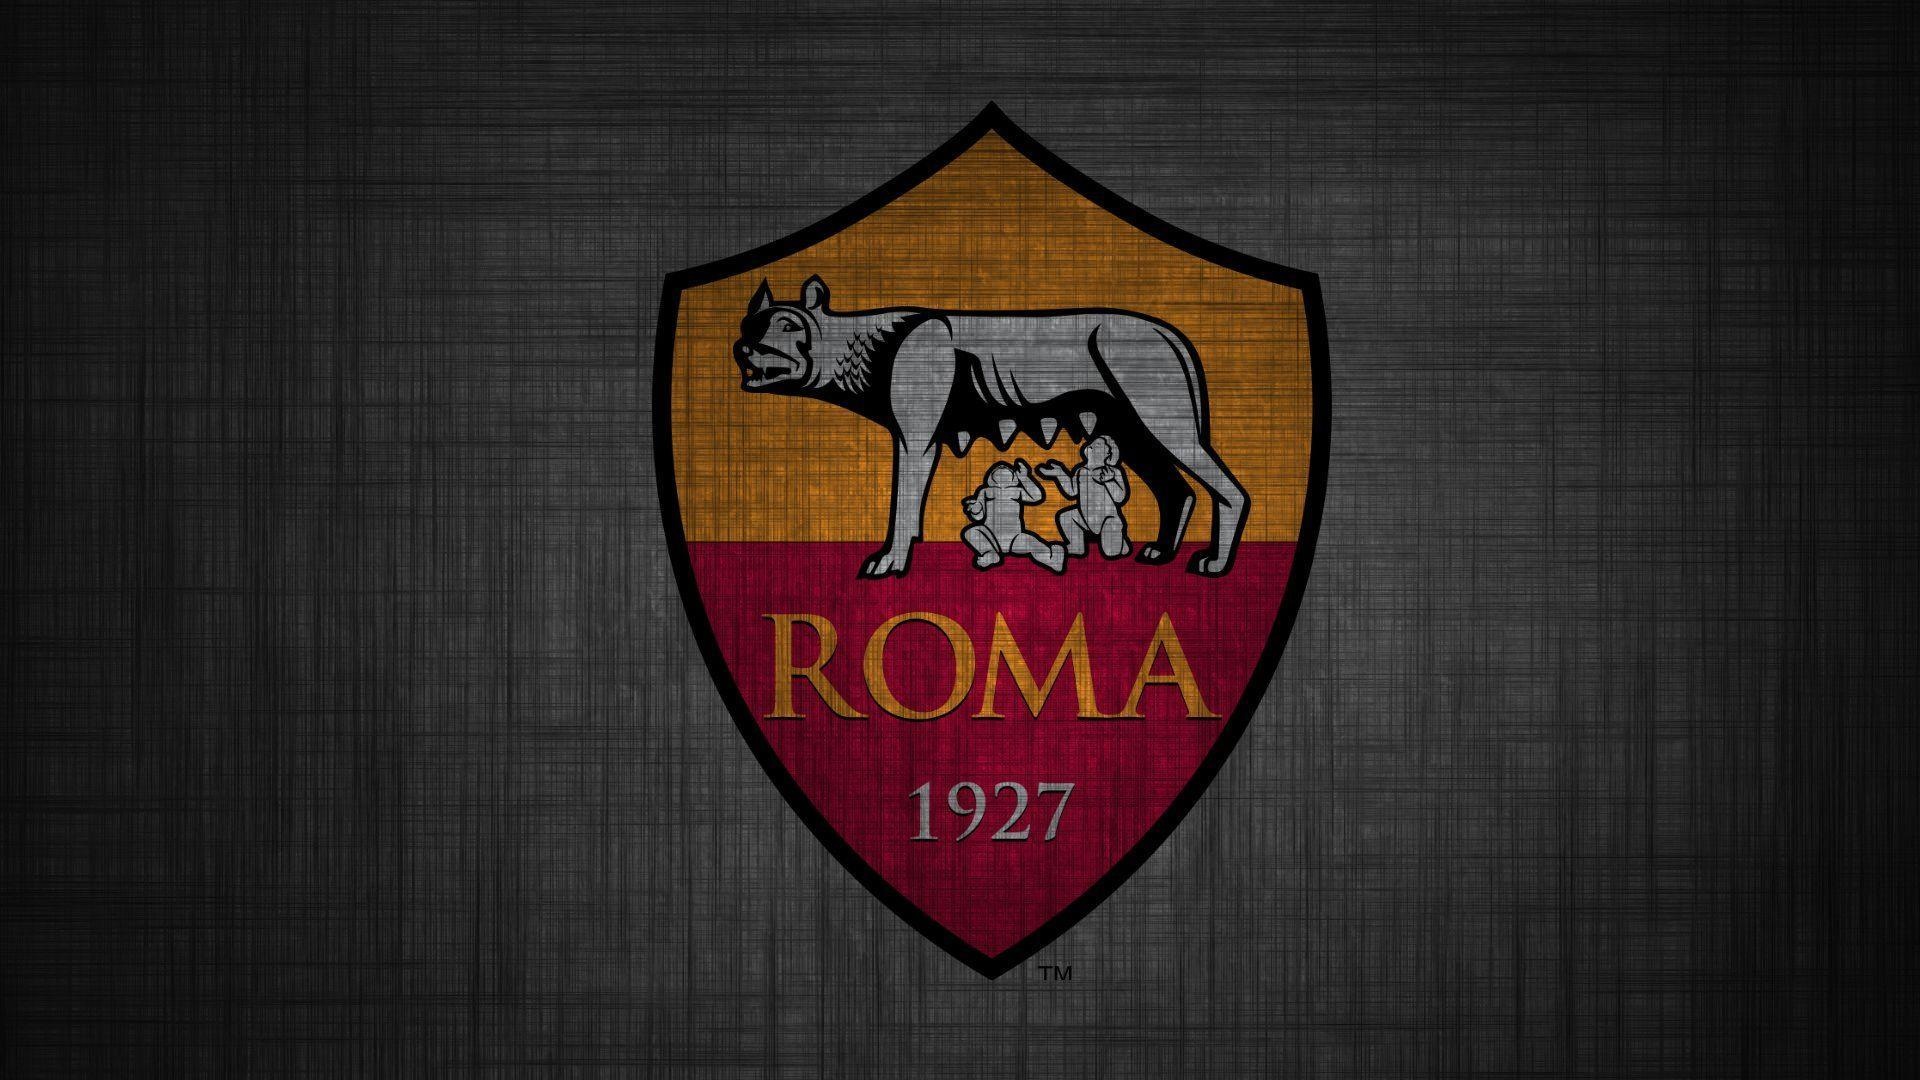 AS Roma wallpapers, Striking visuals, Multifunctional devices, Football devotion, 1920x1080 Full HD Desktop